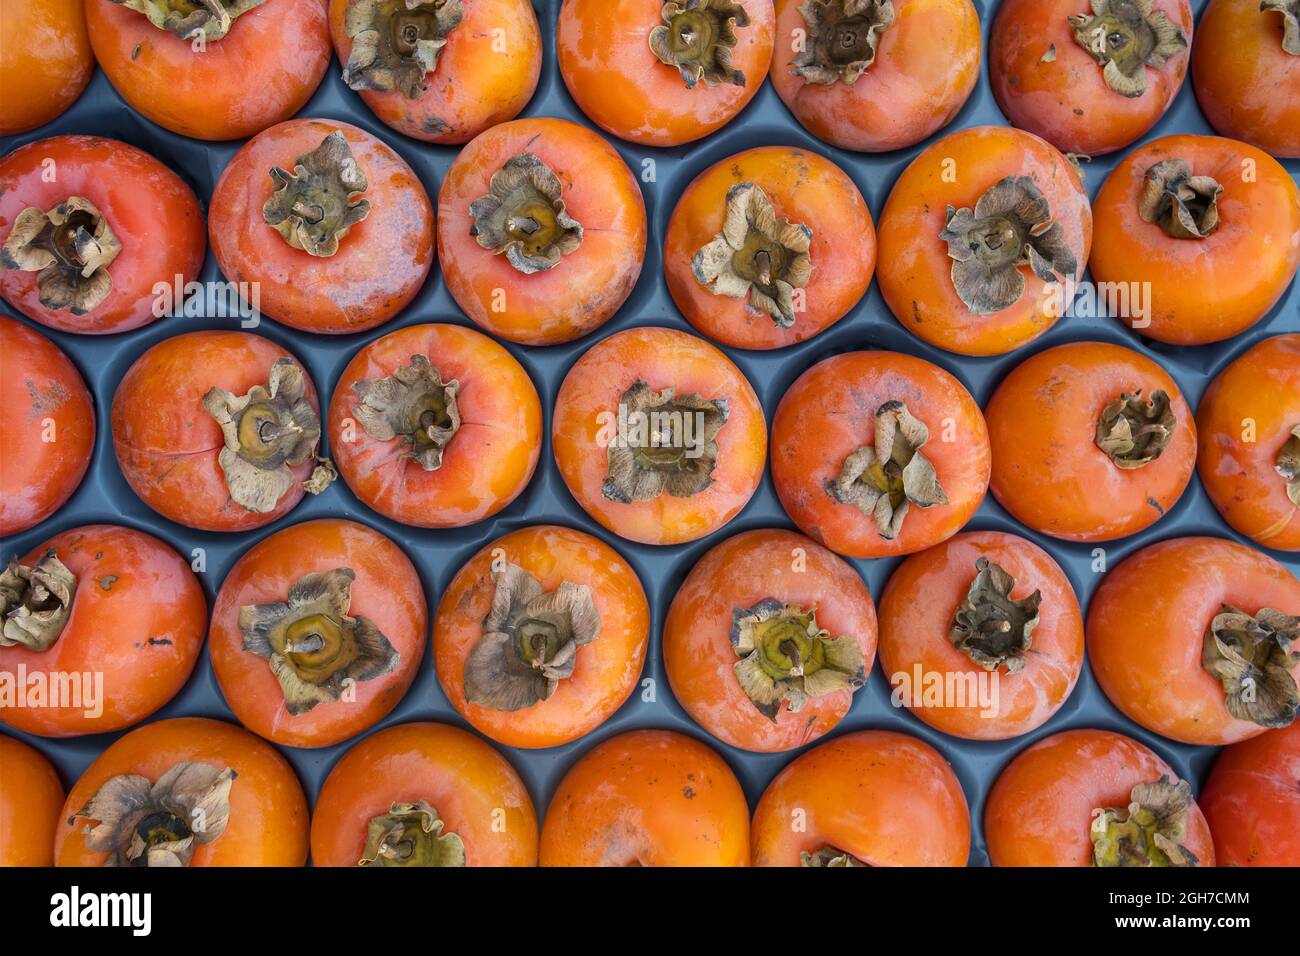 Delicious ripe persimmon fruits close-up on the market stall Stock Photo